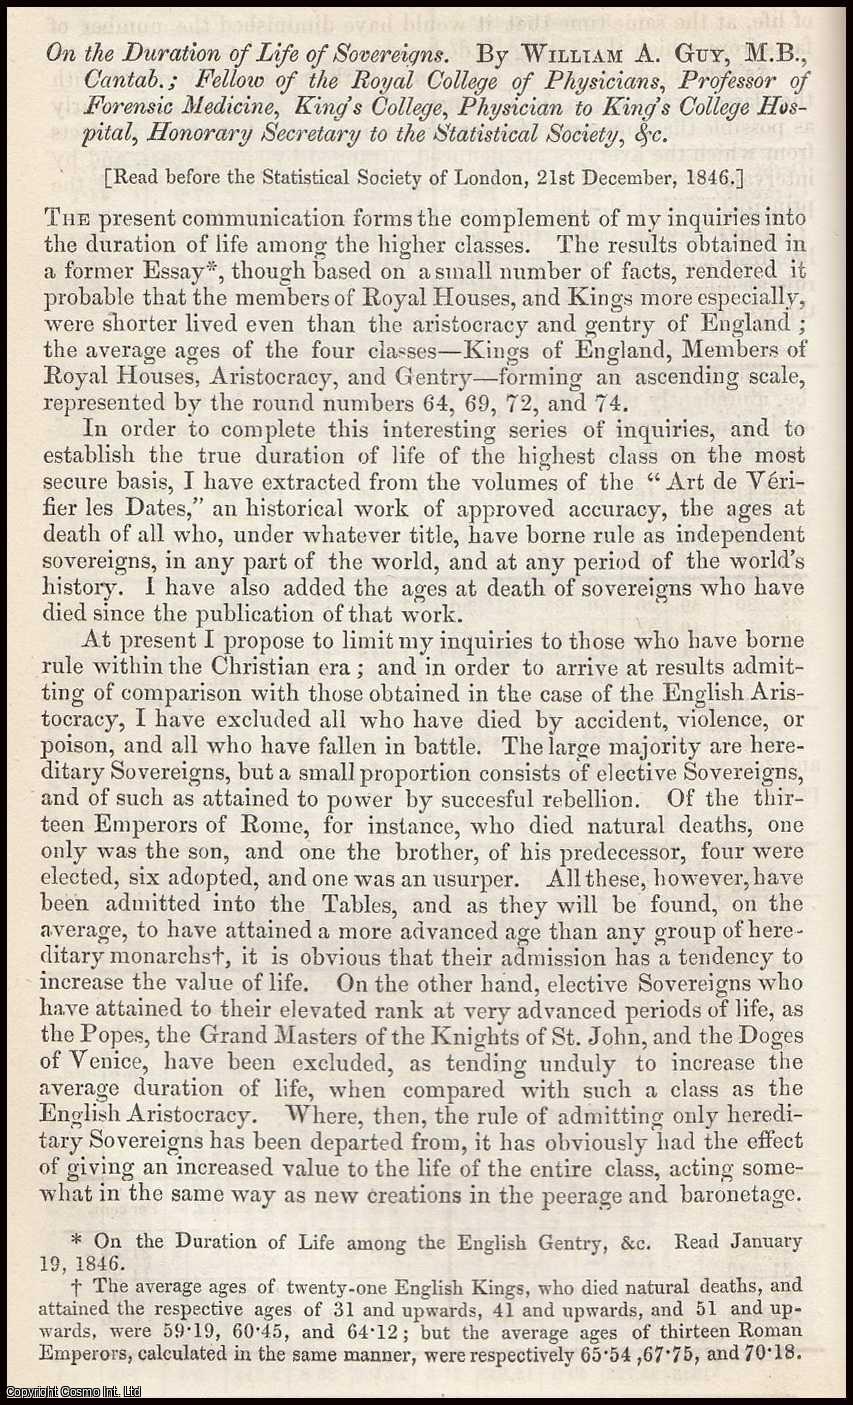 Guy, William Augustus - On the Duration of Life of Sovereigns. A rare original article from the Journal of the Royal Statistical Society of London, 1847.